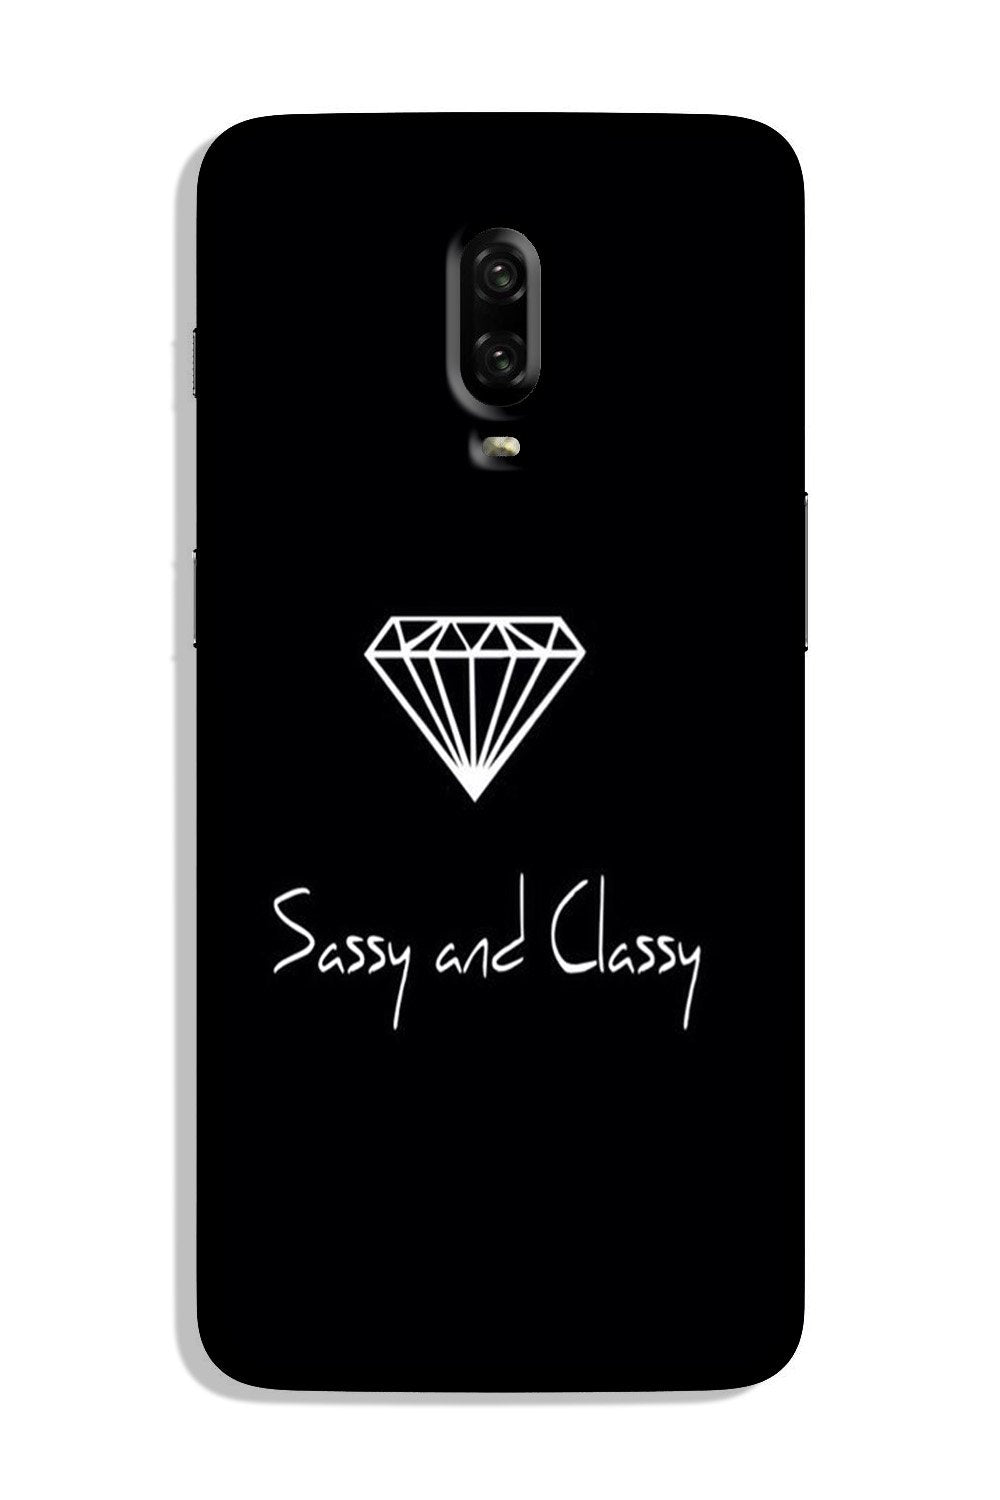 Sassy and Classy Case for OnePlus 7 (Design No. 264)